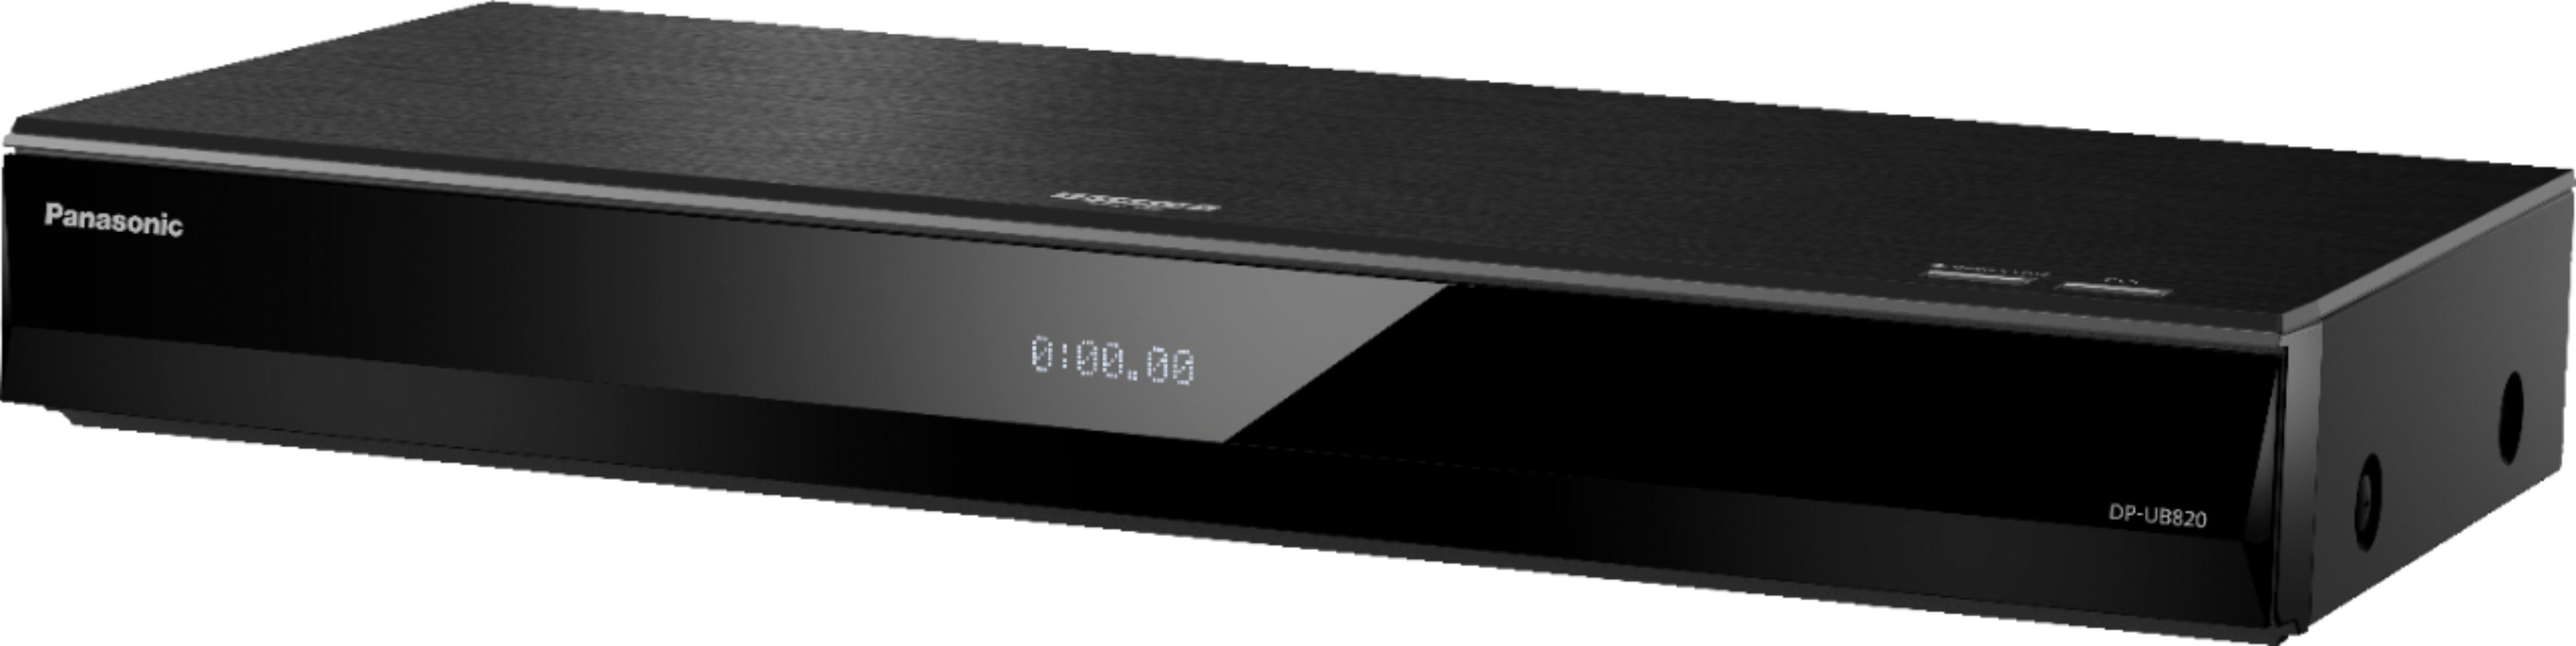 Panasonic - Streaming 4K Ultra HD Hi-Res Audio with Dolby Vision 7.1  Channel DVD/CD/3D Wi-Fi Built-In Blu-Ray Player - Black